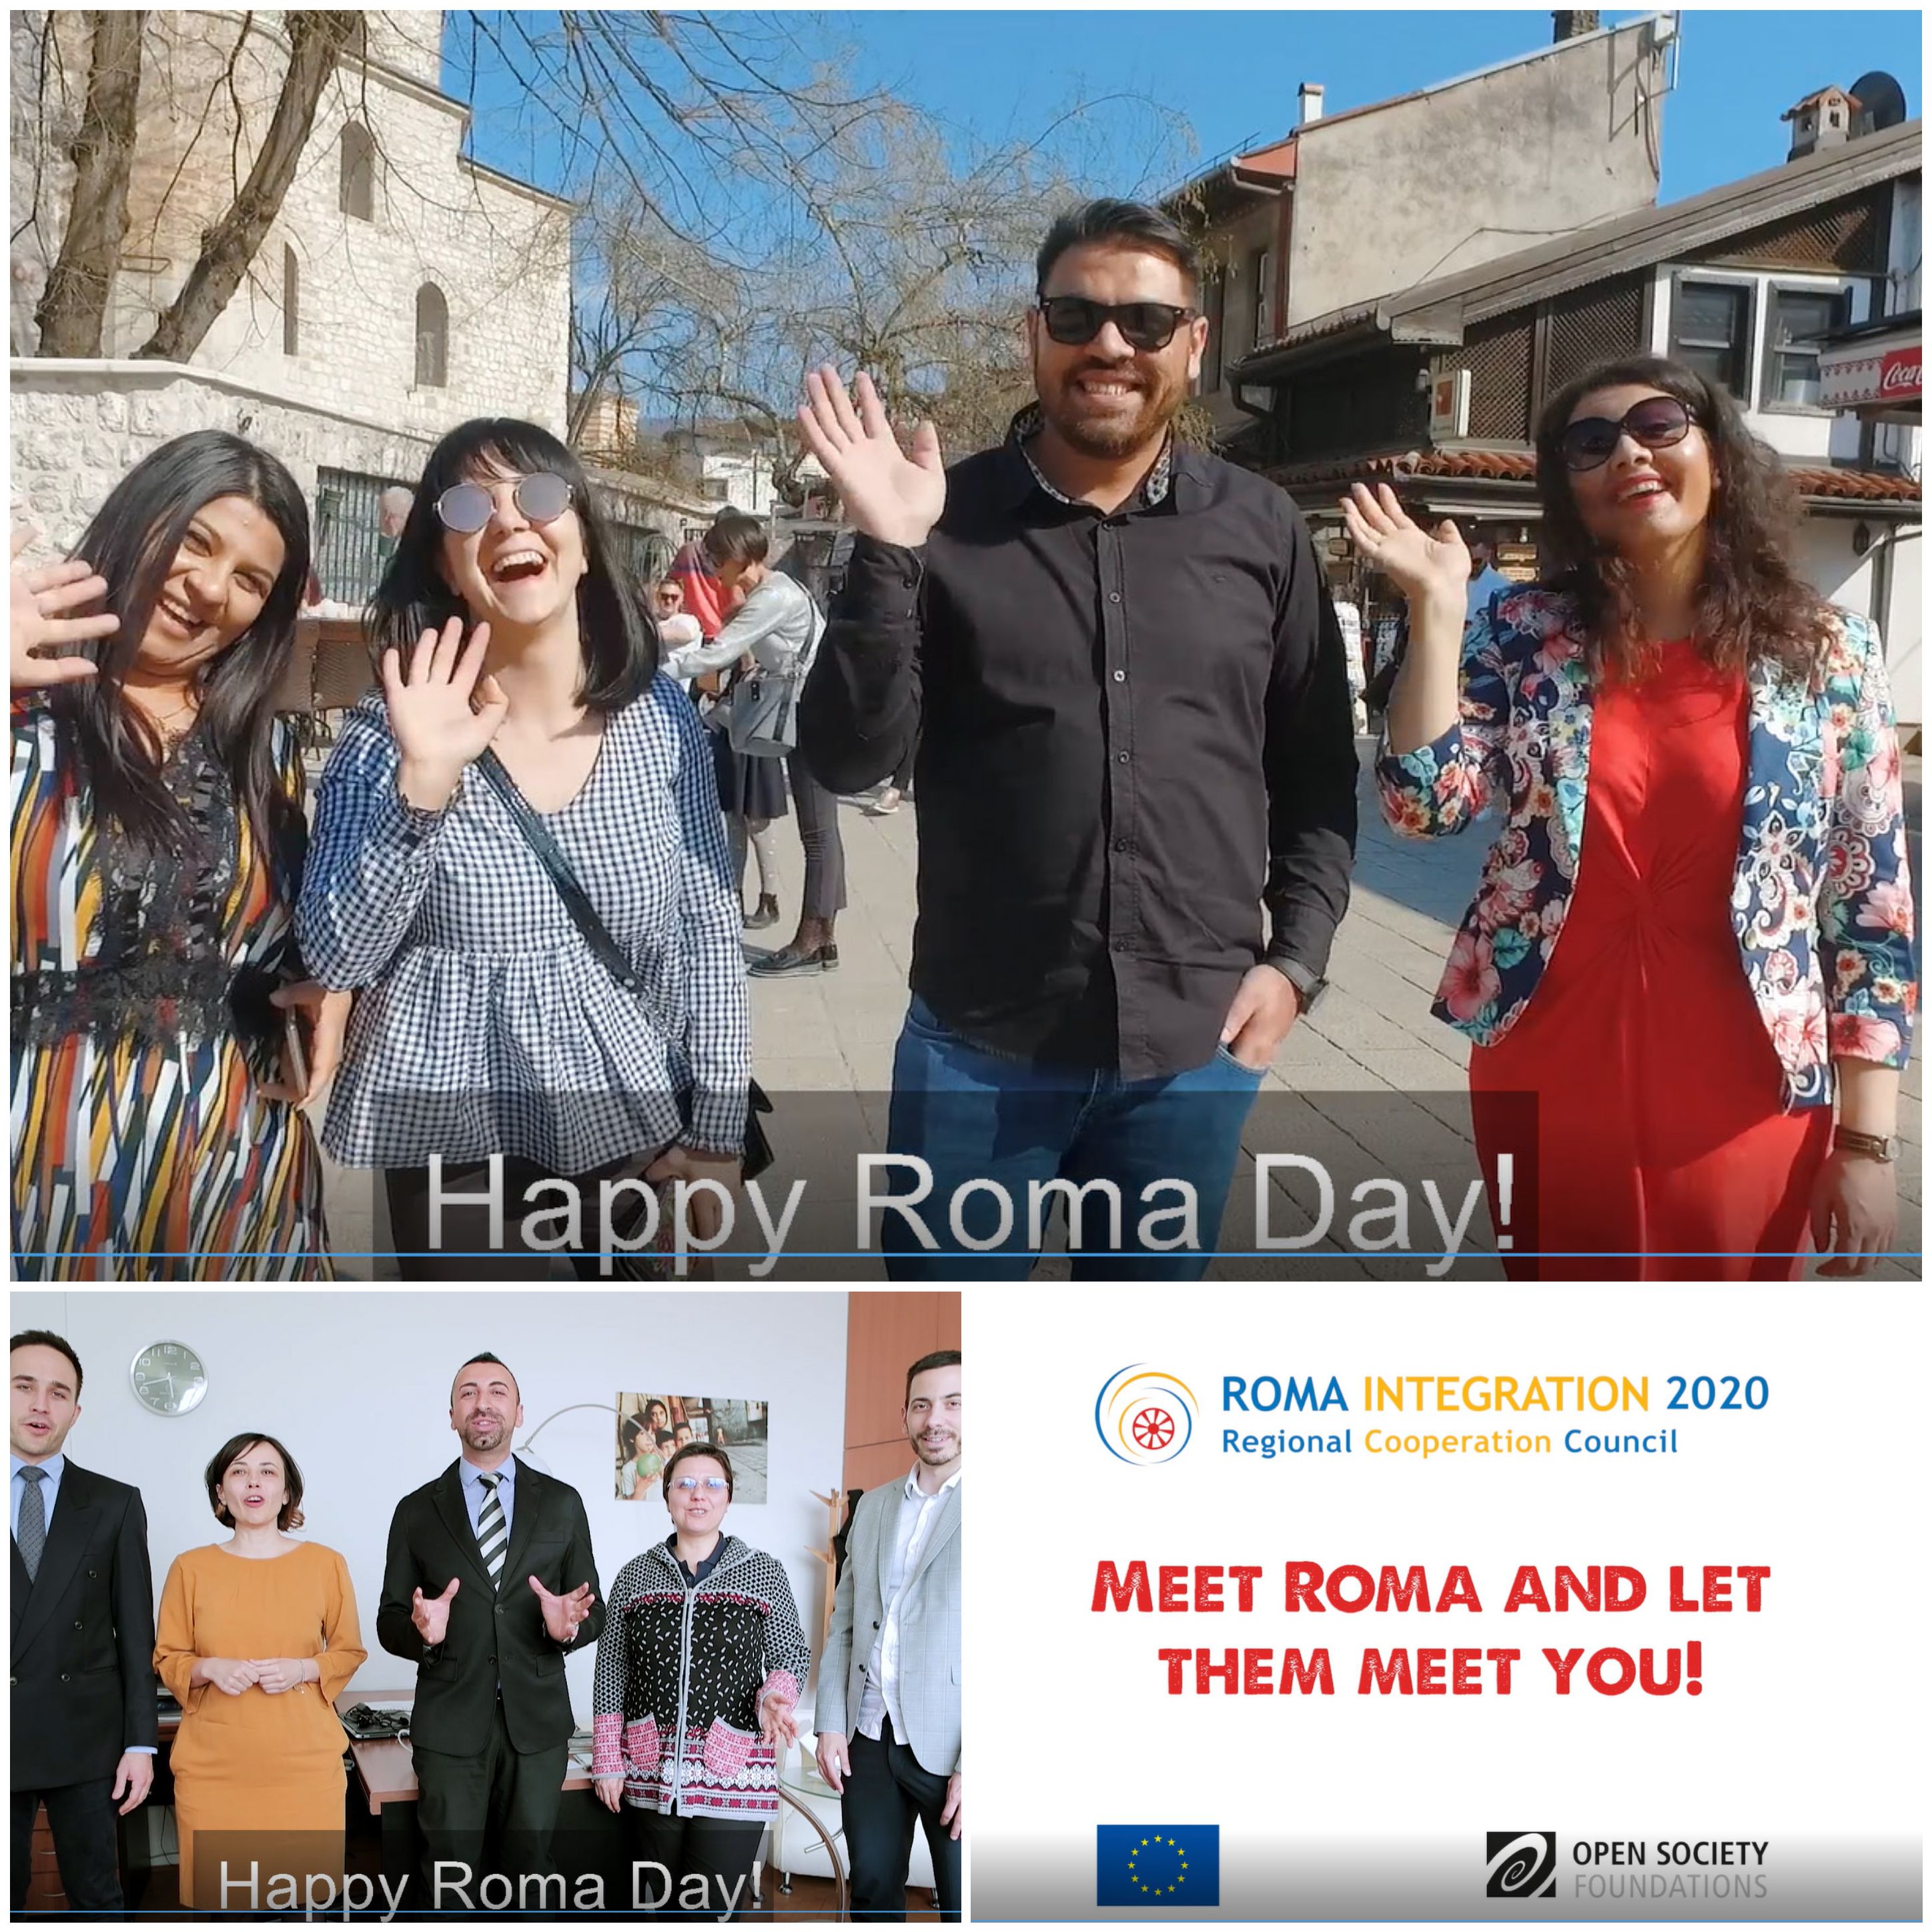 Regional Cooperation Council (RCC) and it's project Roma Integration 2020 are marking 8 April, International Roma Day (Photo: RCC/Klicker)  